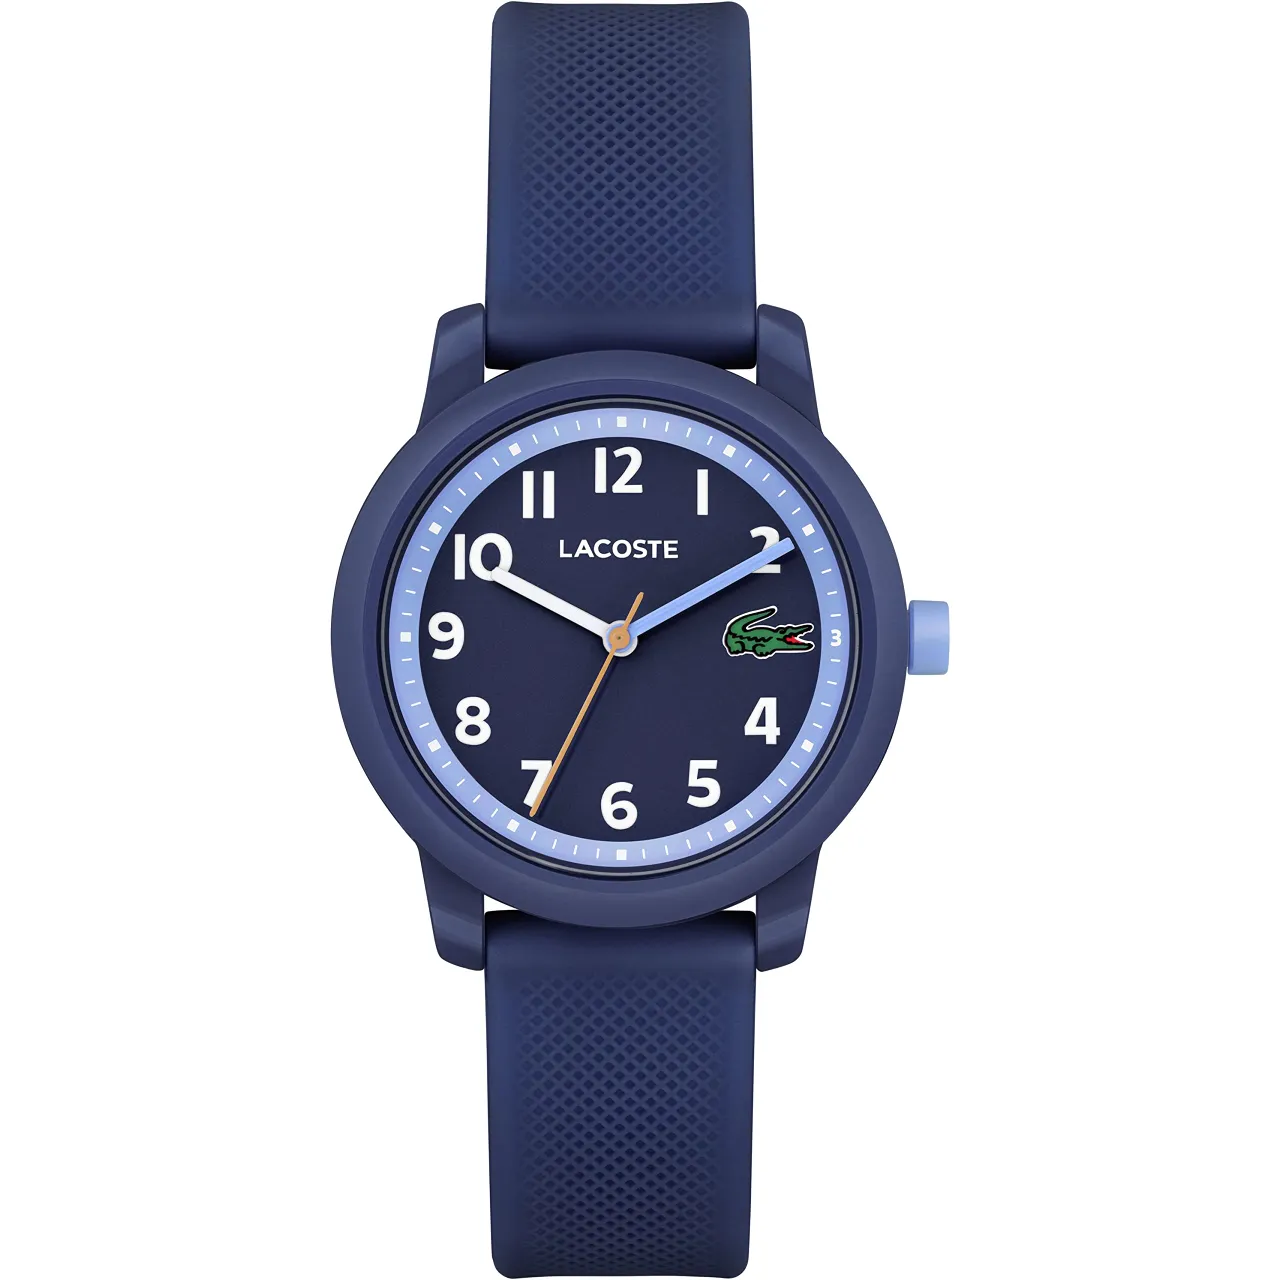 Lacoste Analogue Quartz Watch for Kids with Navy Blue